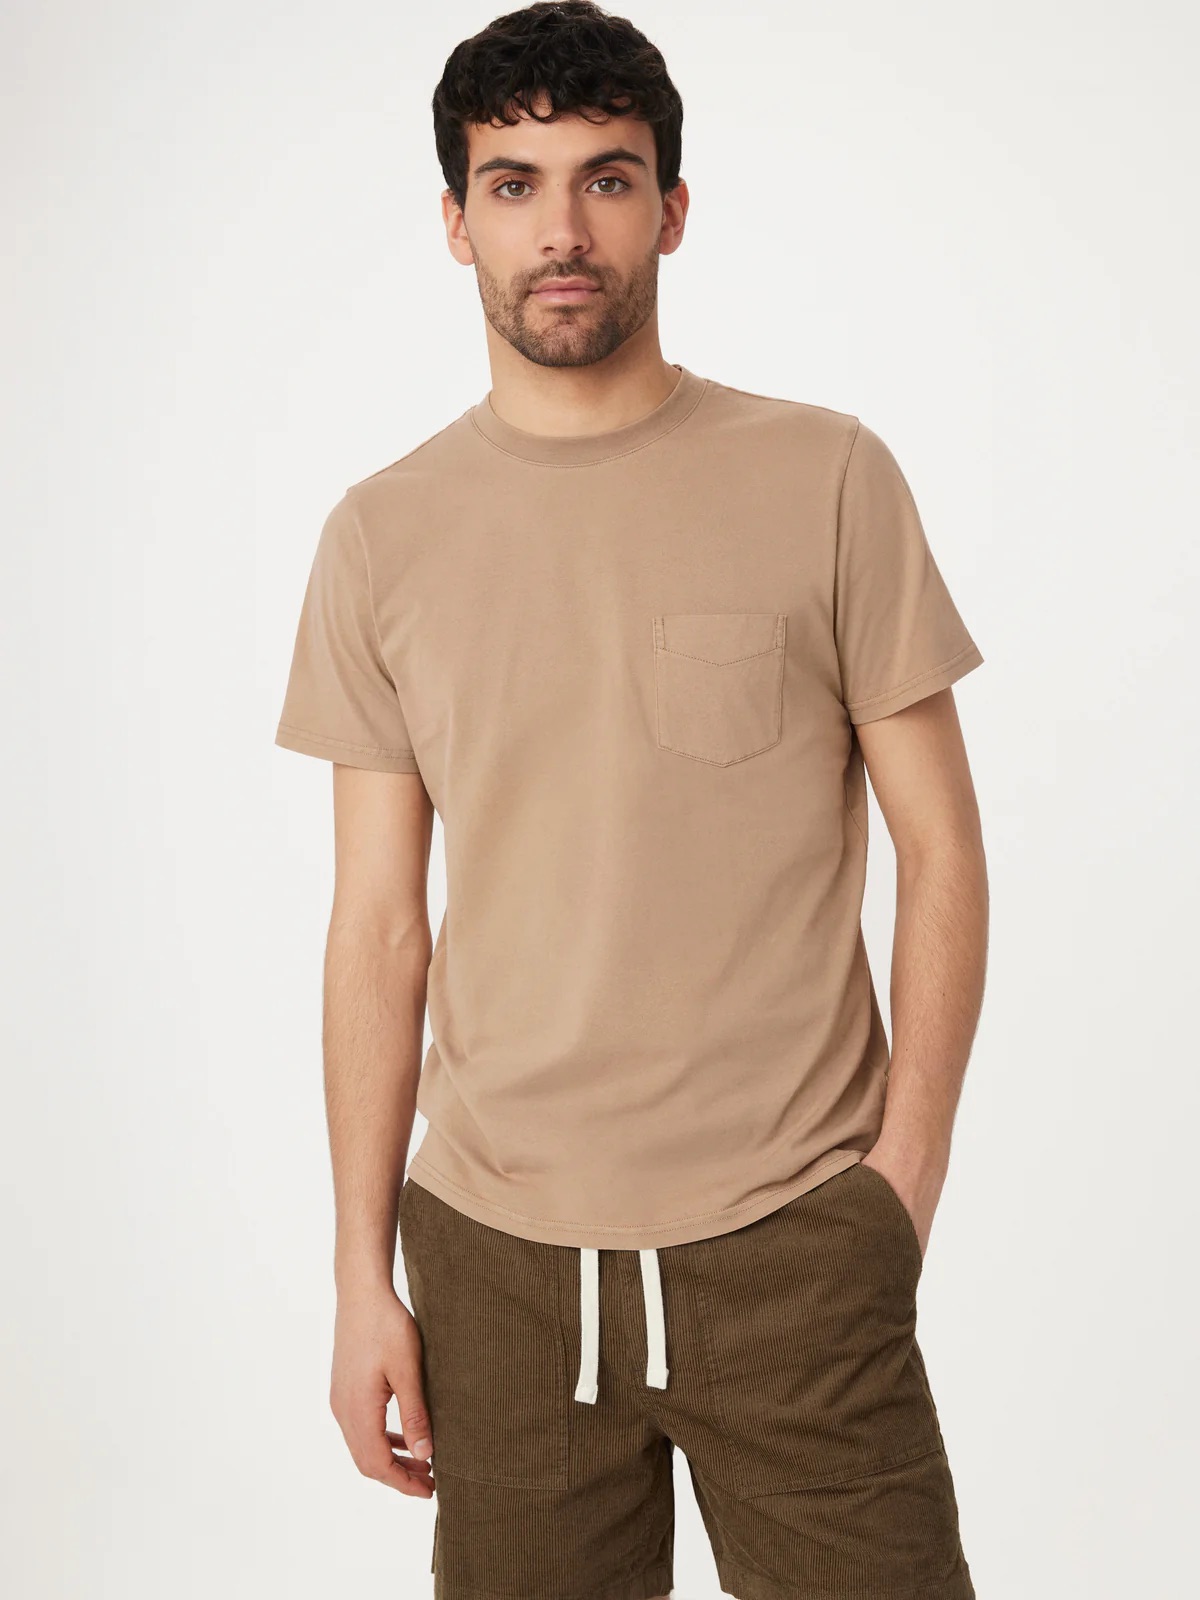 A young man wearing a beige t-shirt and brown trousers standing against a white background.